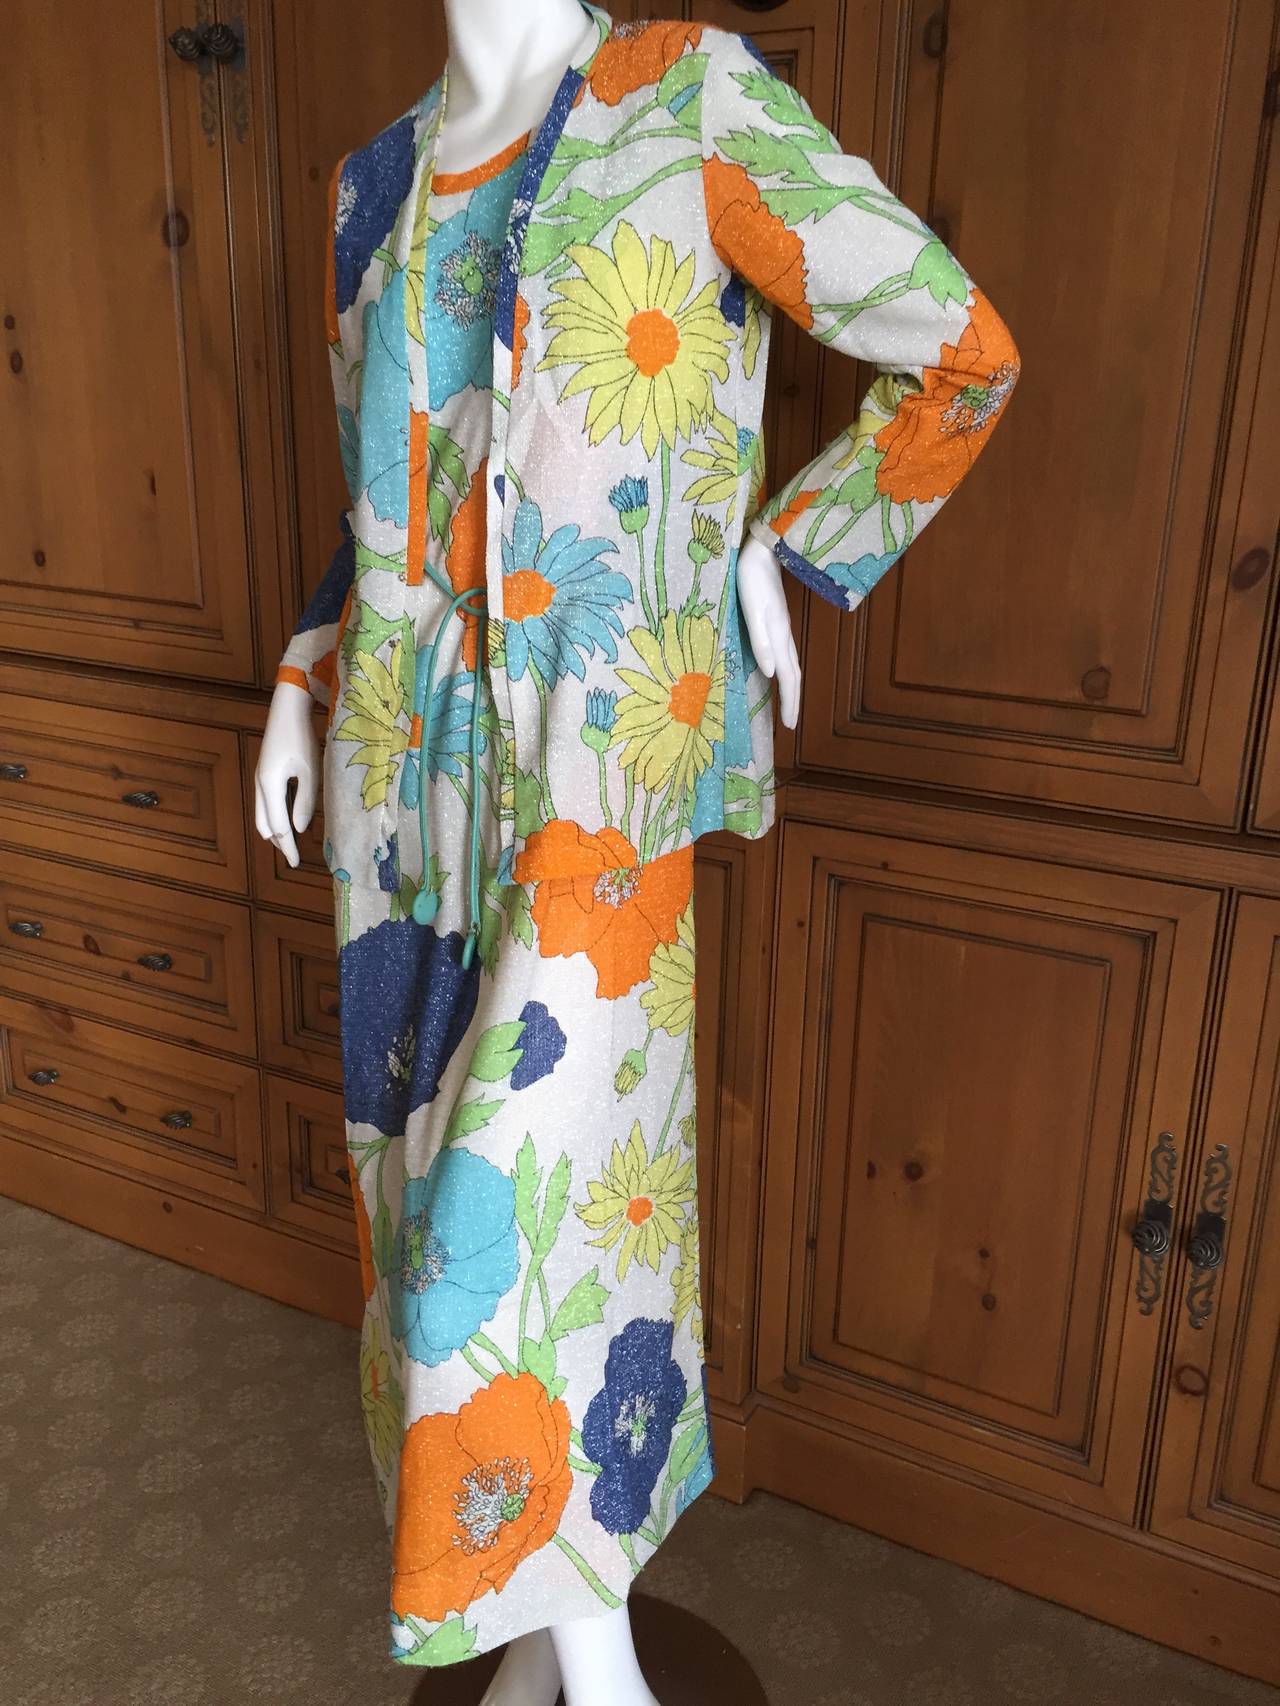 The Lilly by Lilly Pulitzer Sleeveless Floral Dress & Jacket In Excellent Condition For Sale In Cloverdale, CA